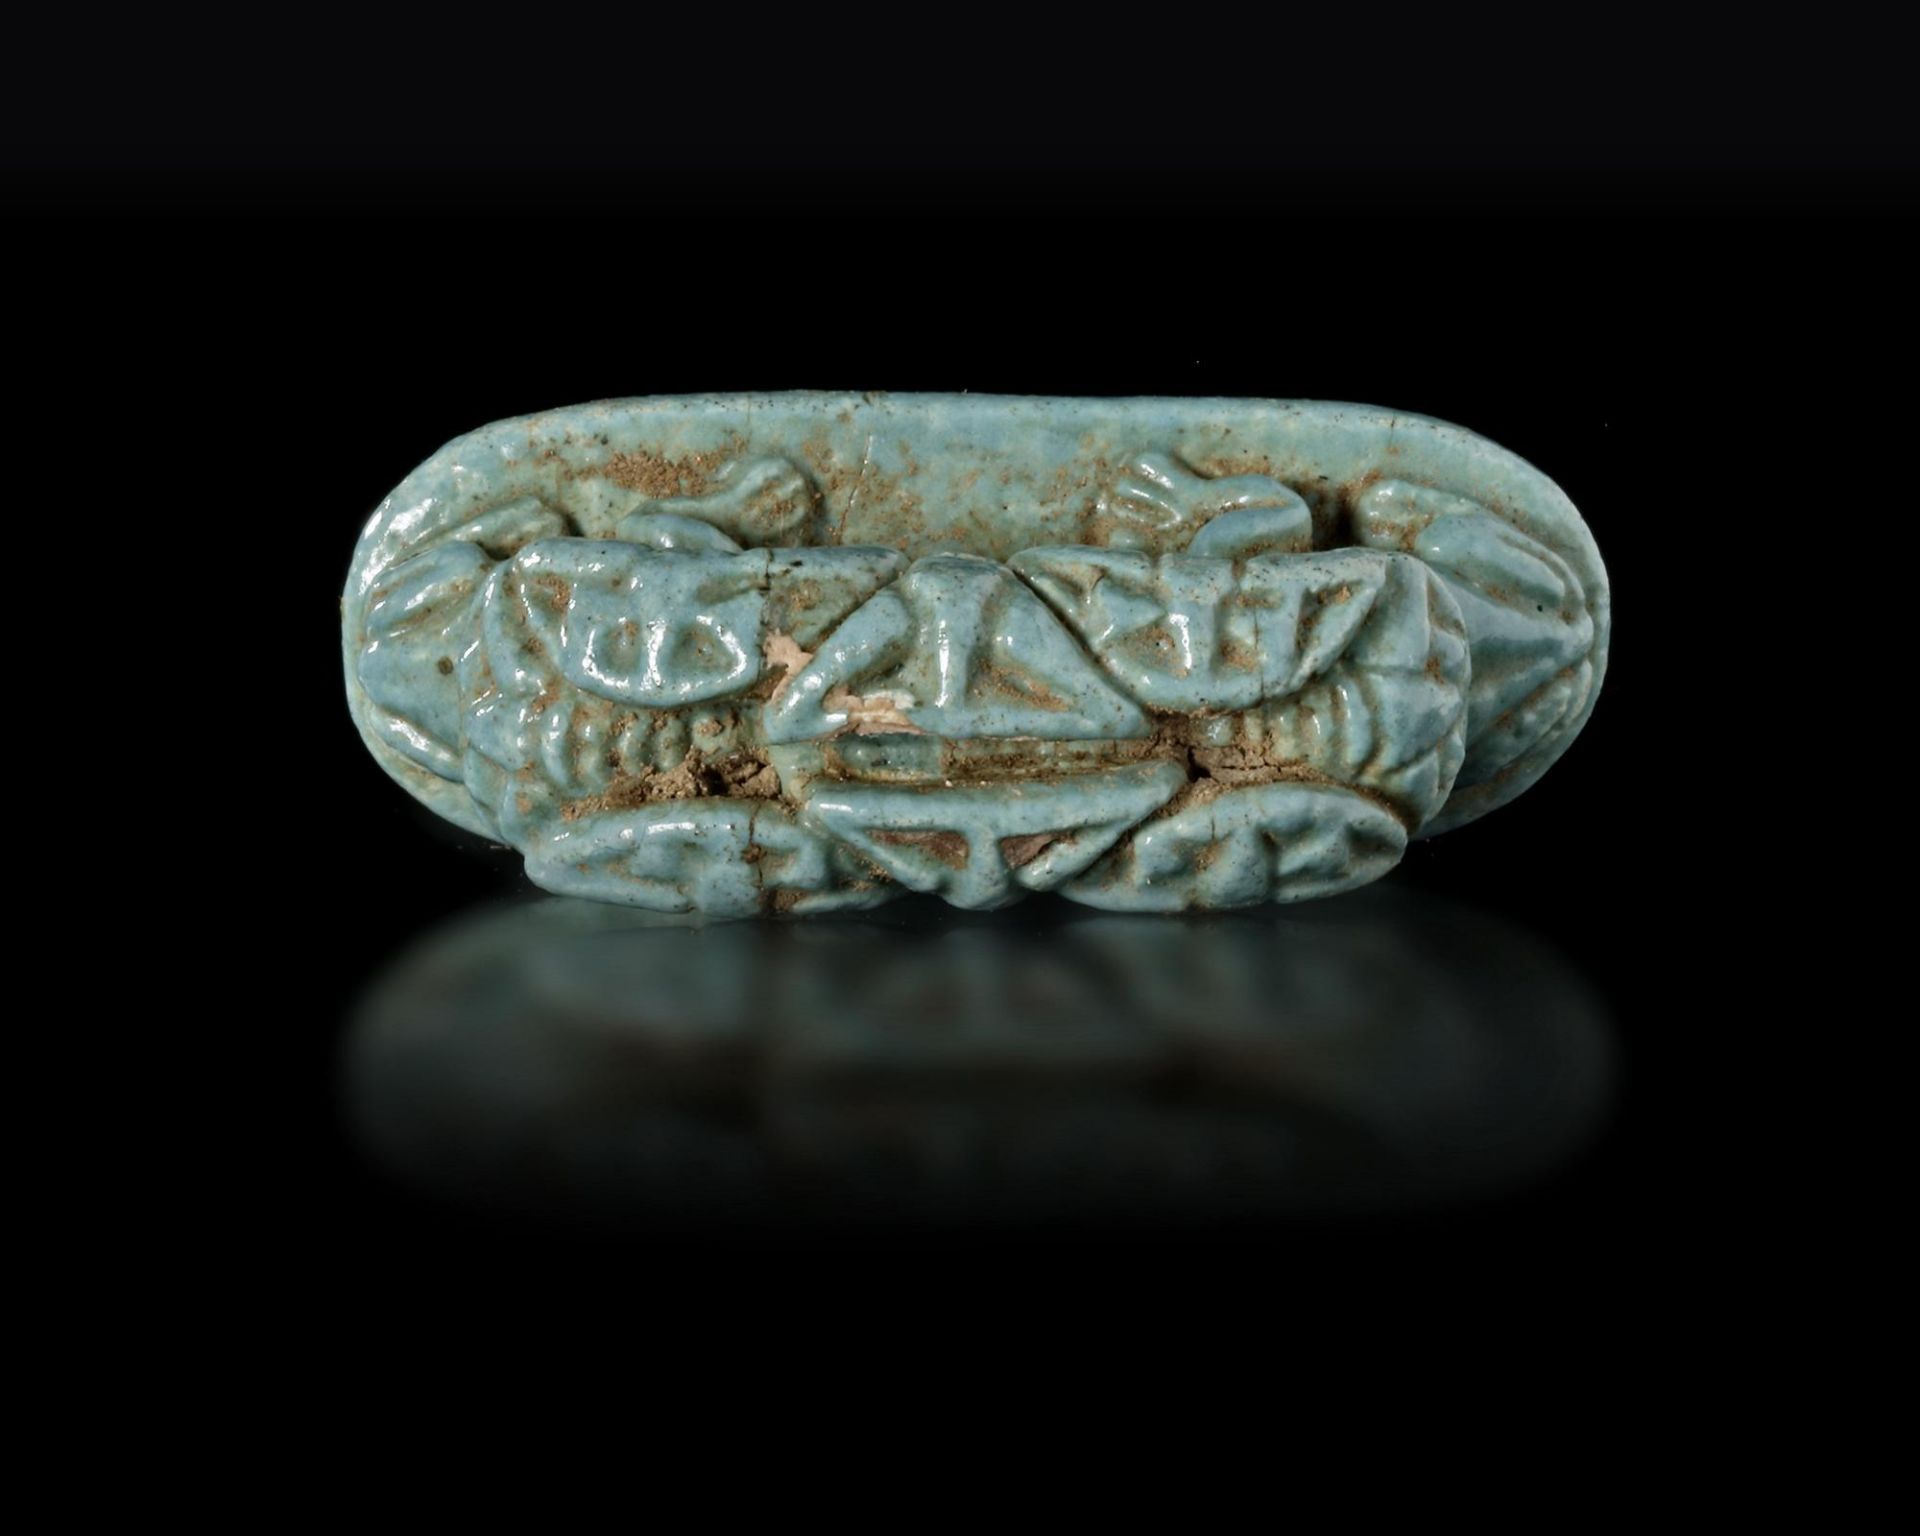 AN EGYPTIAN FAIENCE AMULET/ STAMP SEALS, CIRCA 4TH CENTURY B.C. - Image 4 of 4